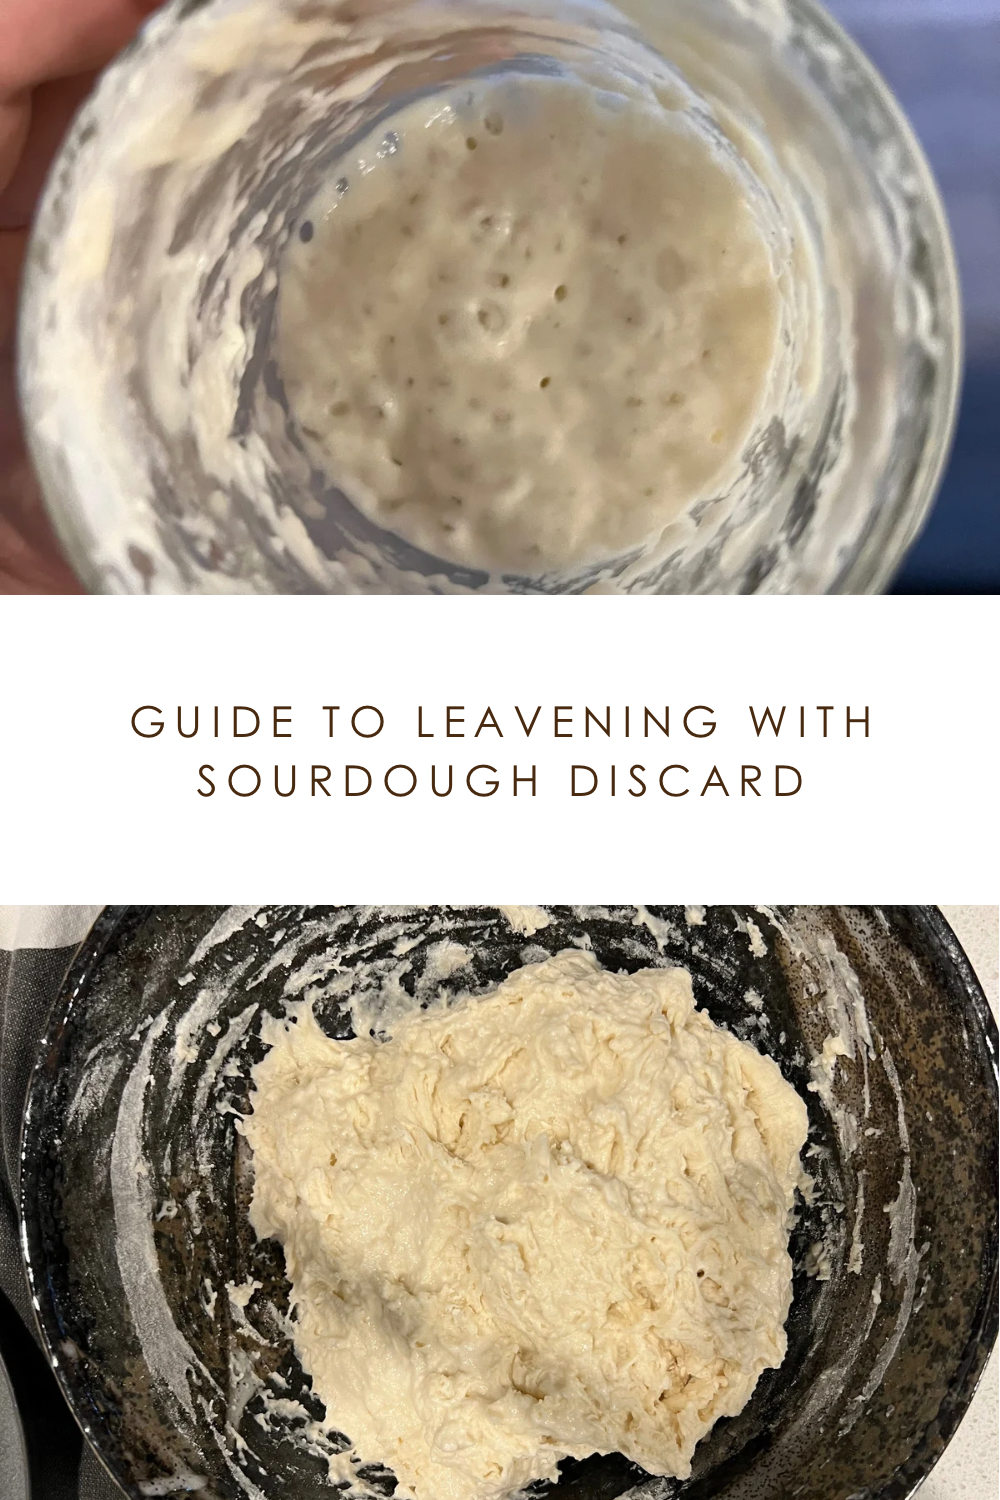 Guide to leavening with sourdough discard